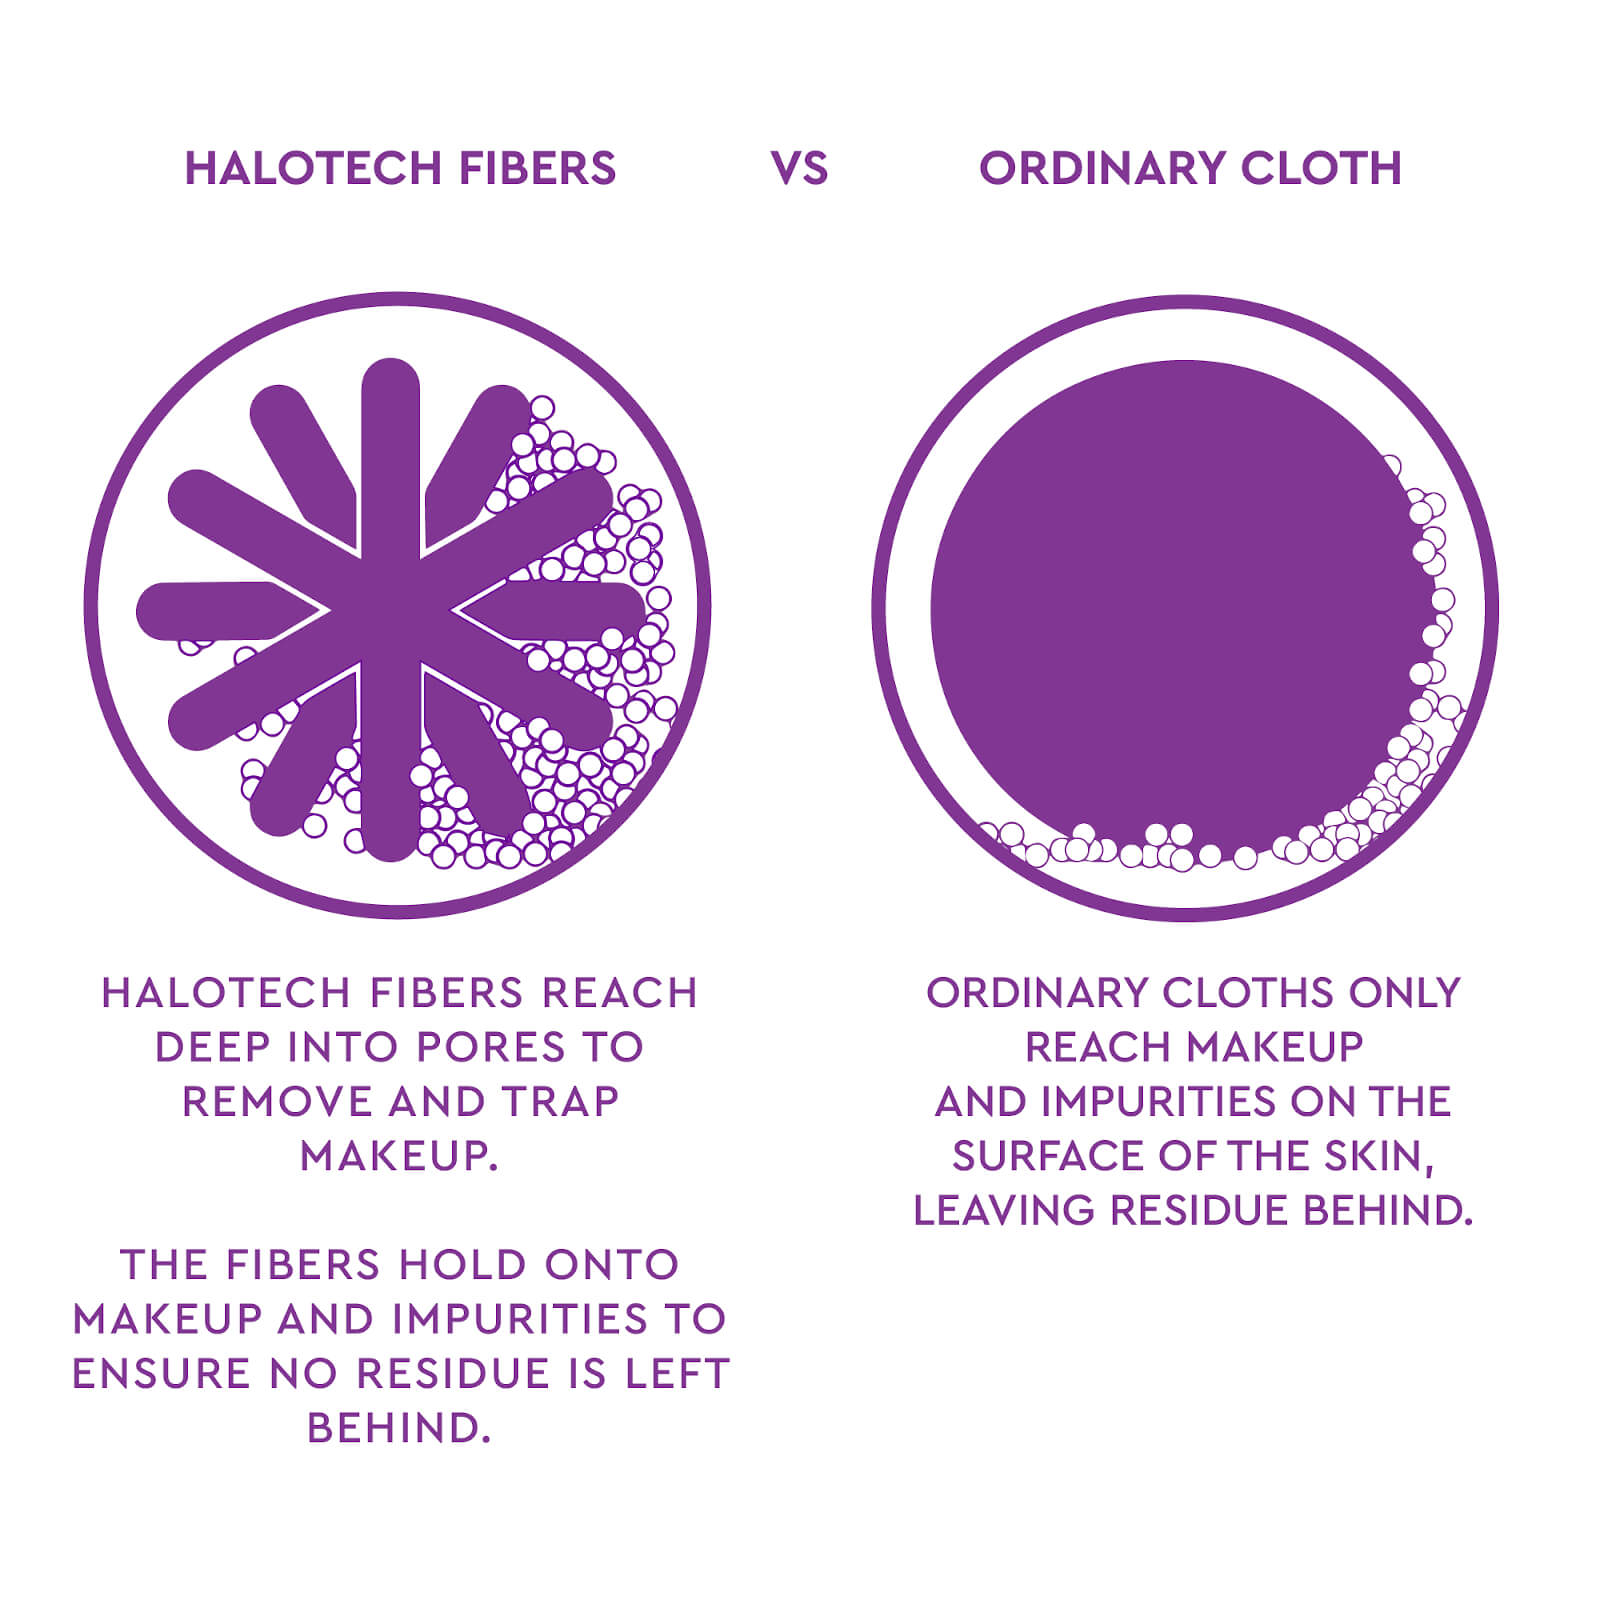 Halotech Fibers - halotech fibers reach deep into the pore to remove and trap makeup. The fibers hold onto makeup and impurities to ensure no residue is left behind. VS, Ordinary cloth, ordinary cloths only reach makeup and impurities on the surface of the skin, leaving residue behind